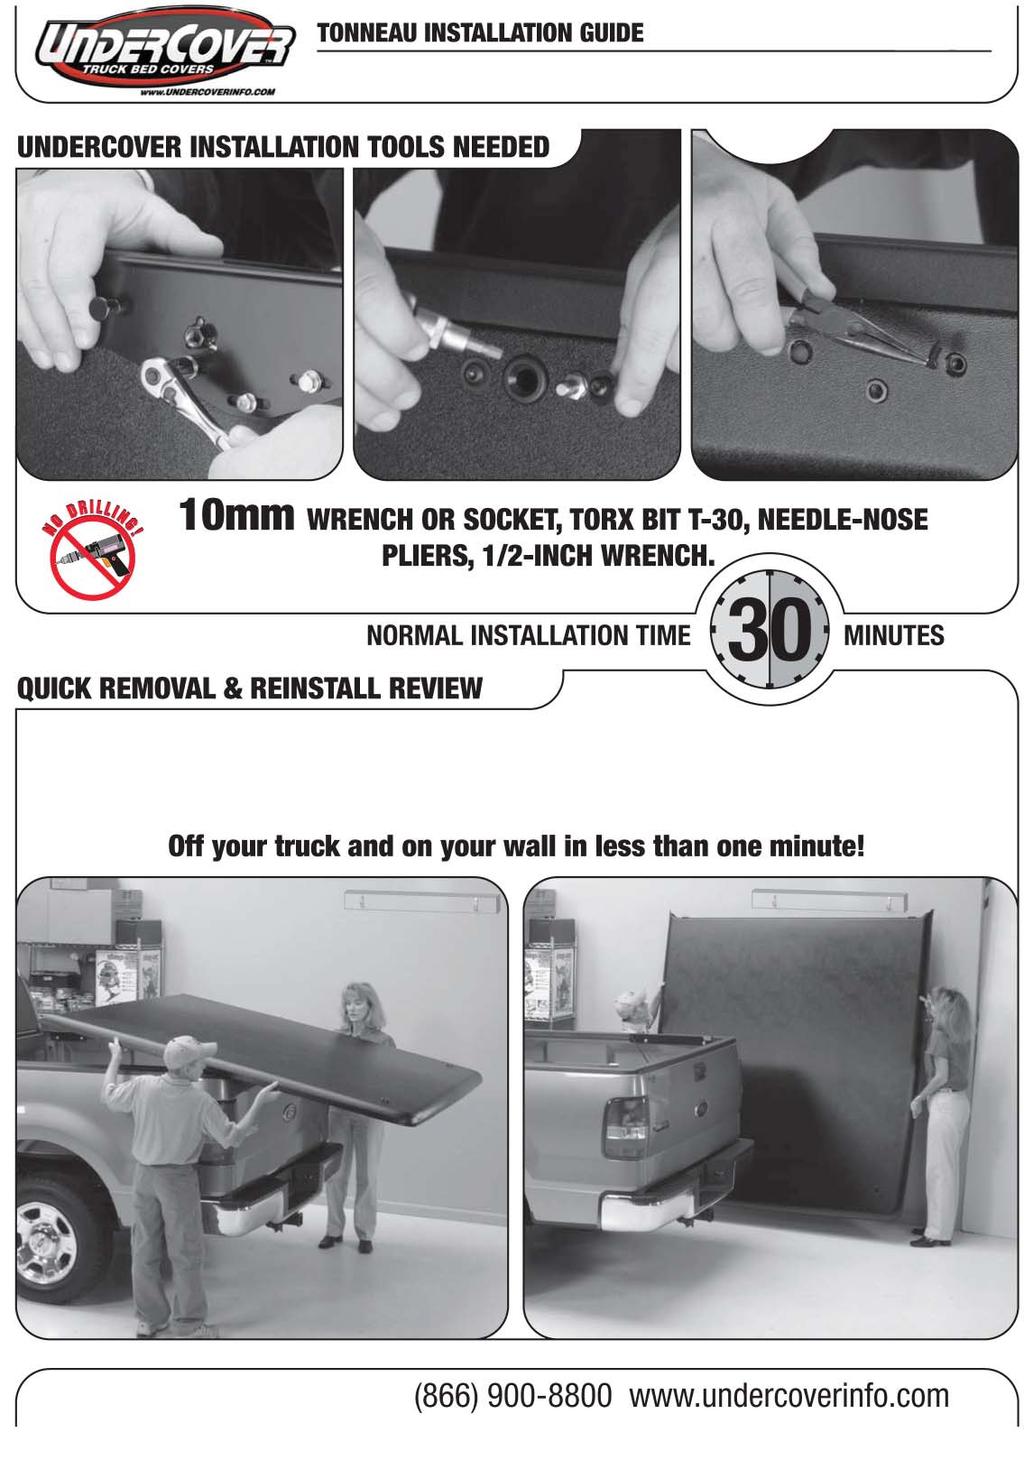 Page 2 Note: If your Tonneau has already been installed,